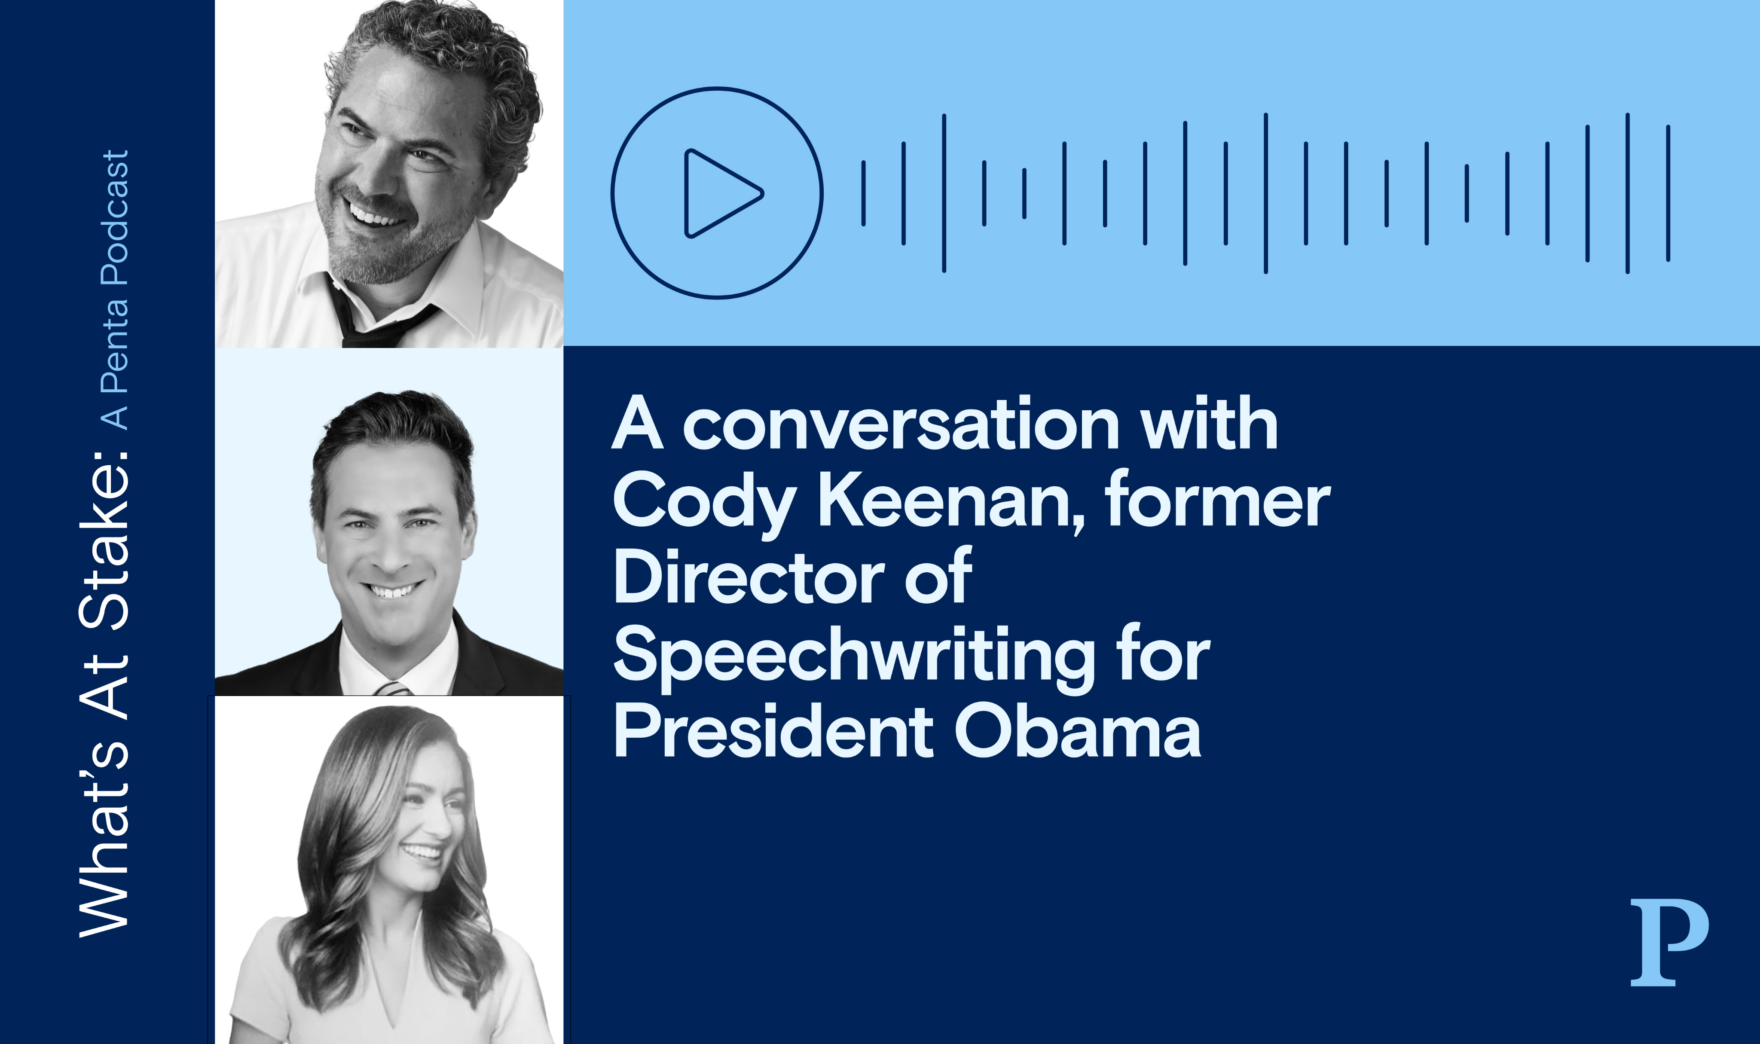 A conversation with Cody Keenan, former Director of Speechwriting for President Obama